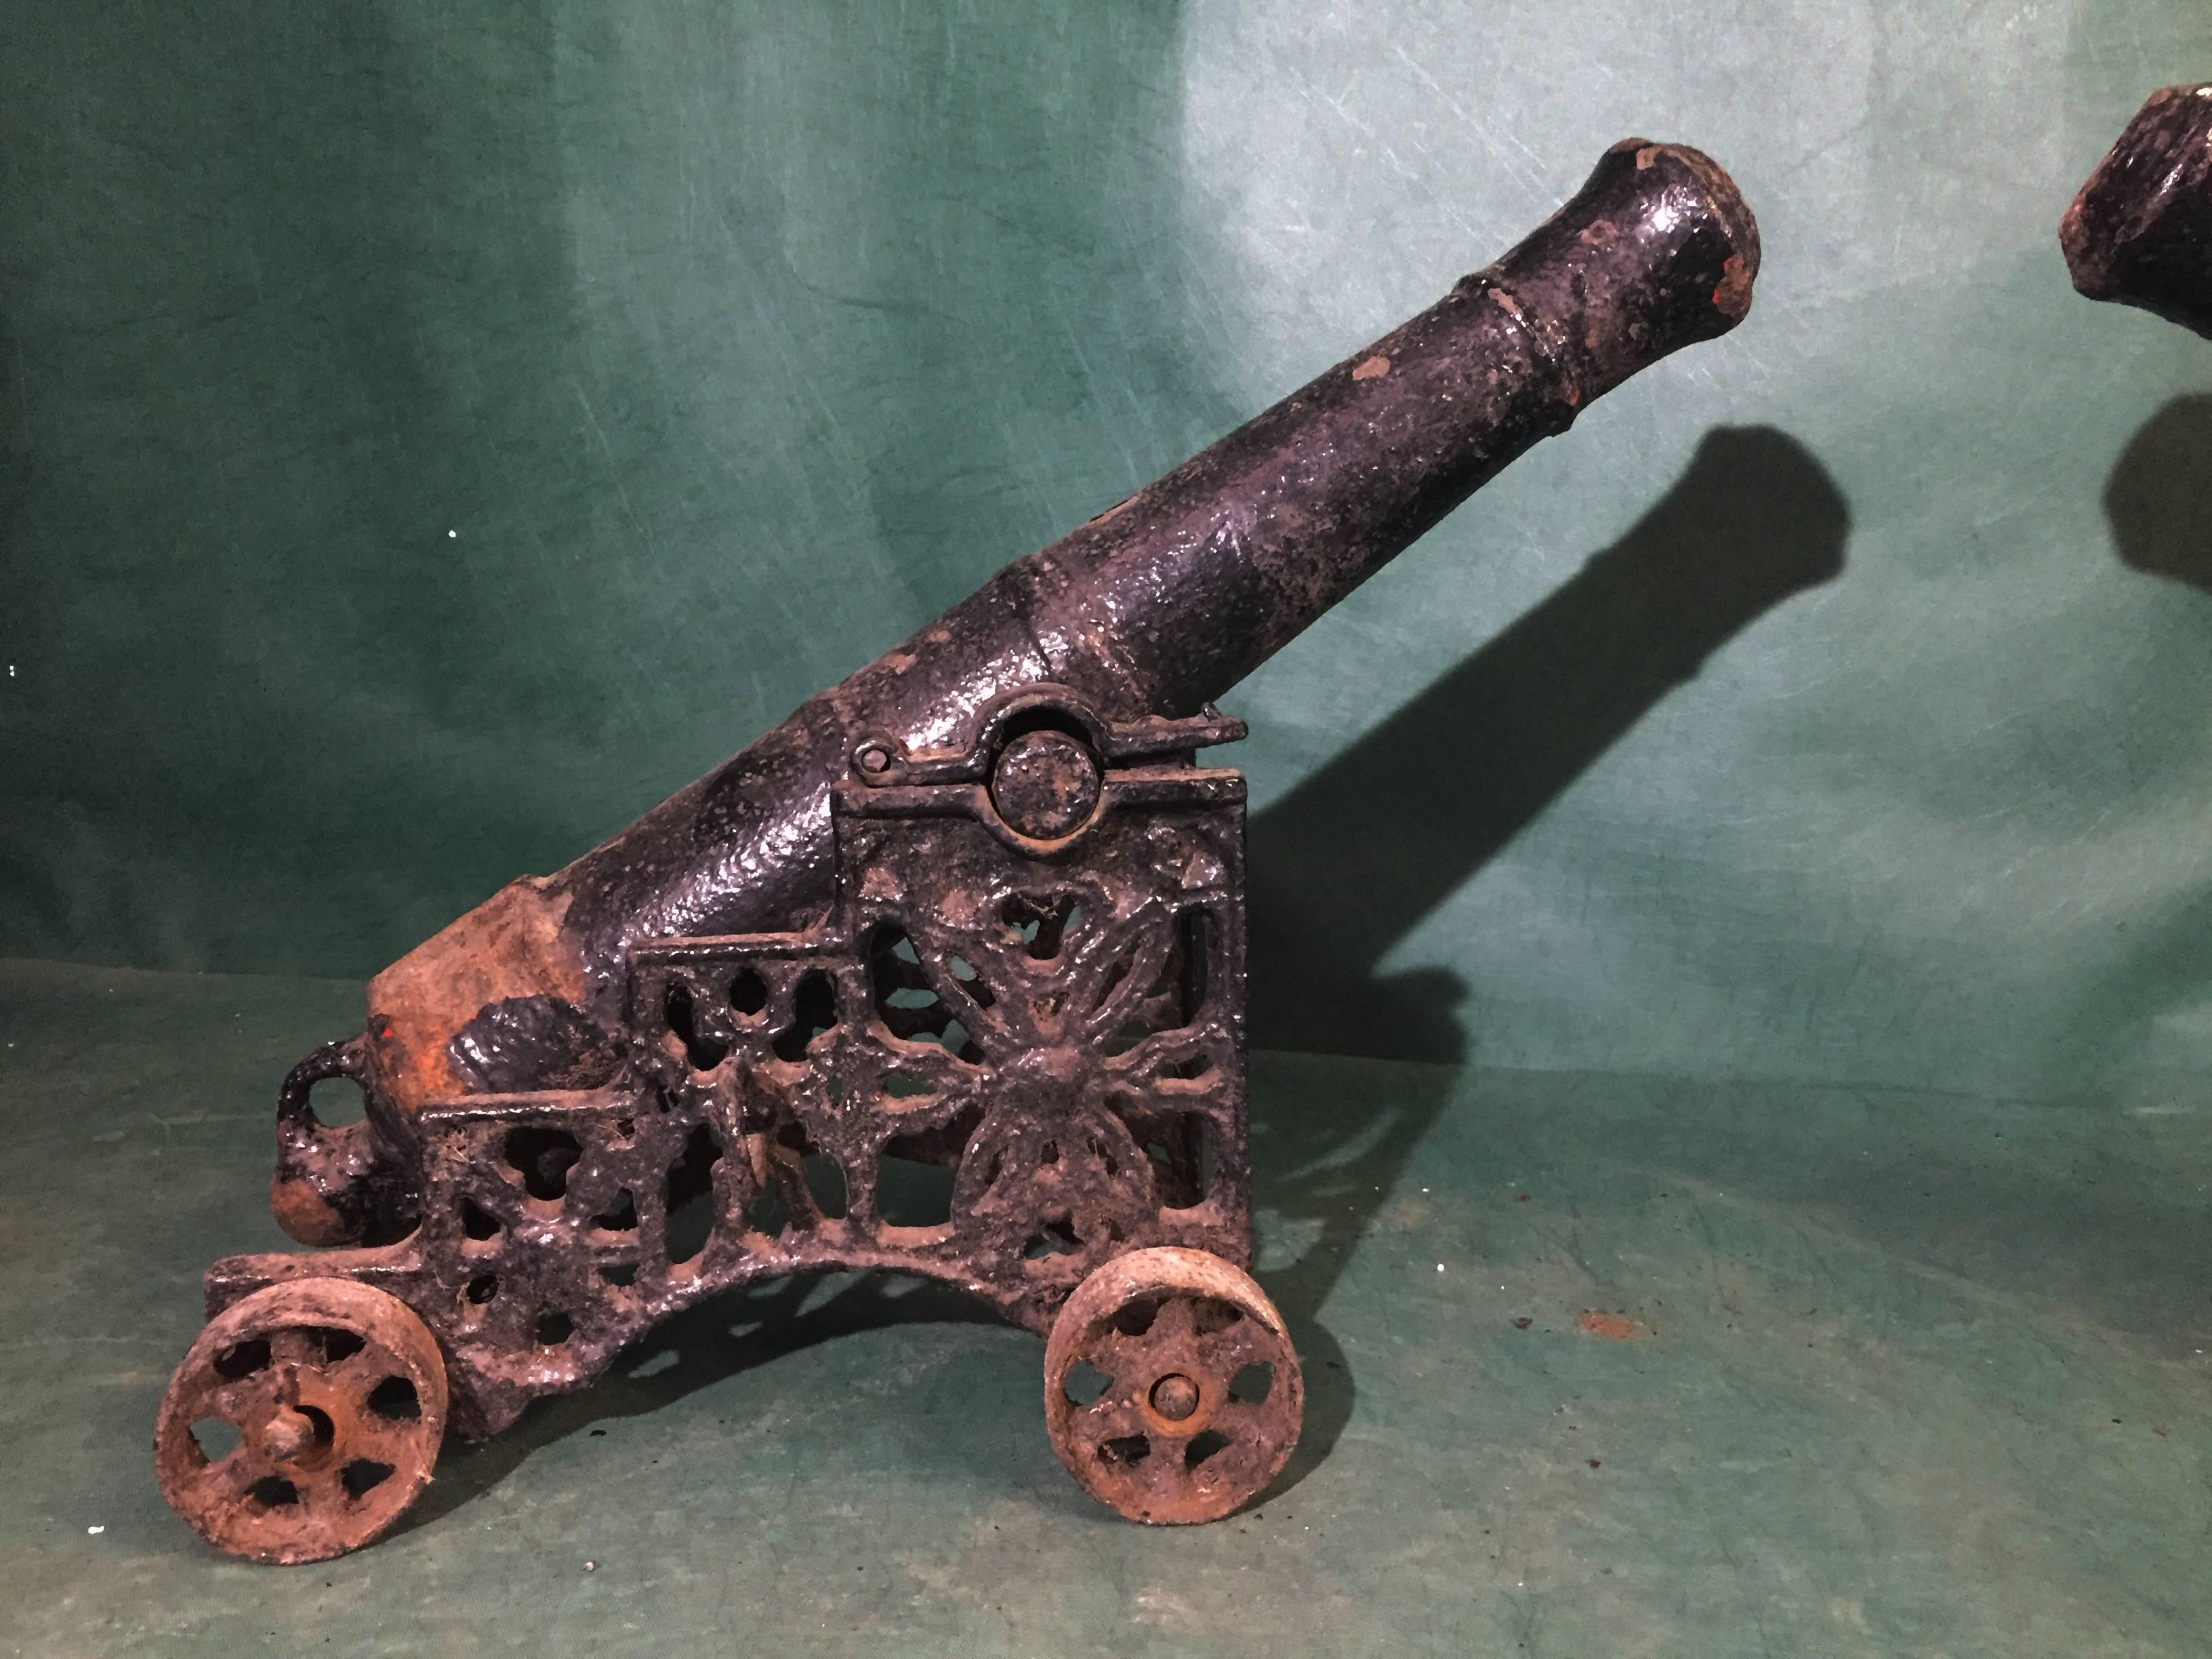 This listing is for one cannon only.

 In good condition subject to use and wear. 

Measurements:
width across carriage wheels: 14 inches
length of barrel: 36 inches
height of cannon from ground when fully elevated: 27 inches.
 